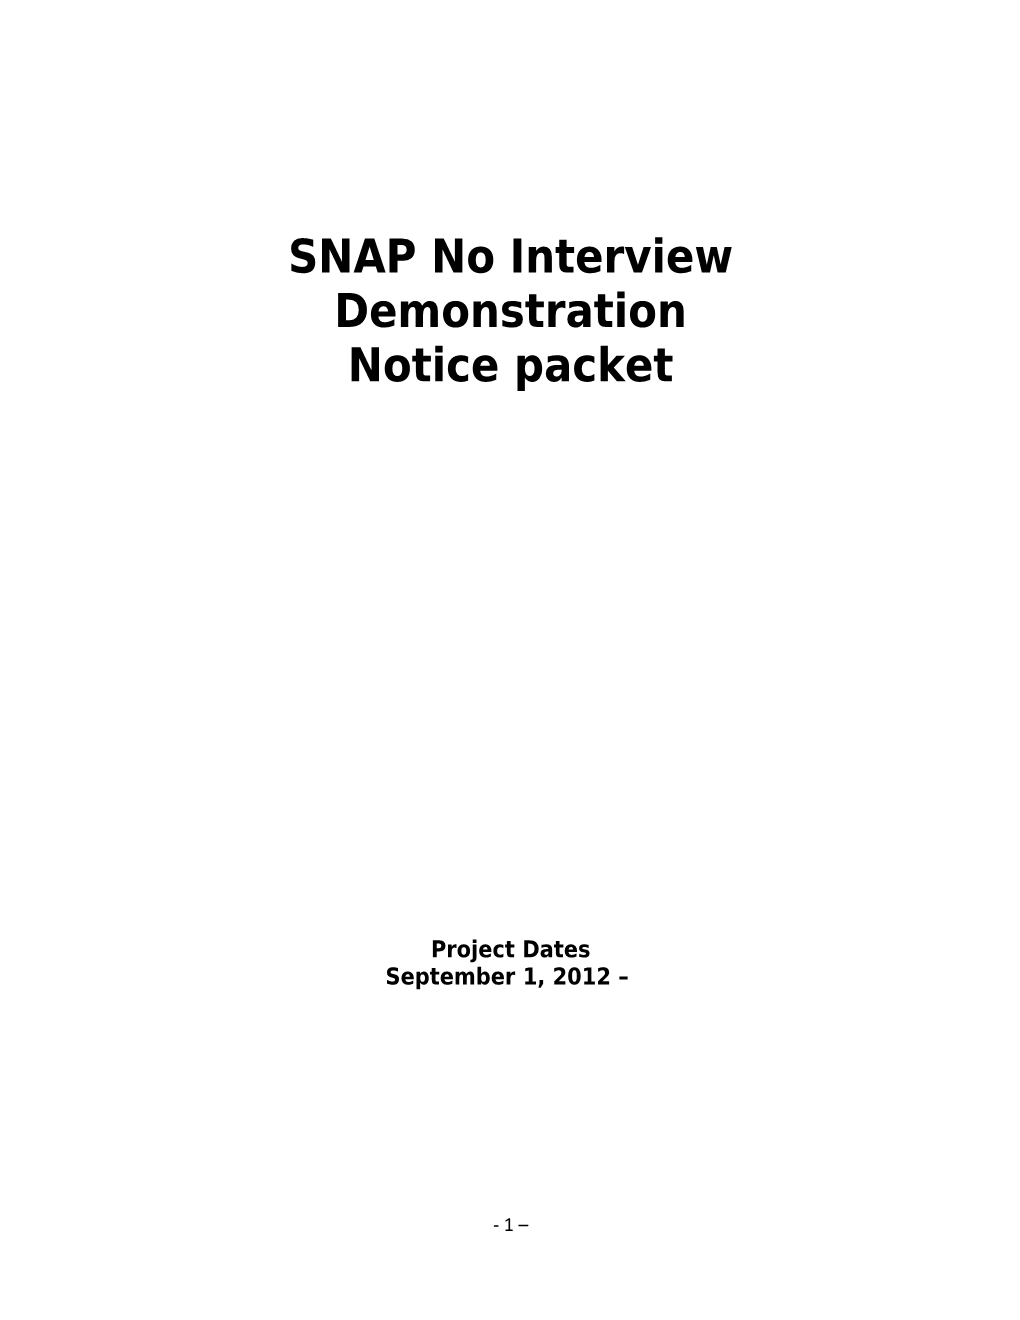 SNAP No Interview Demonstration